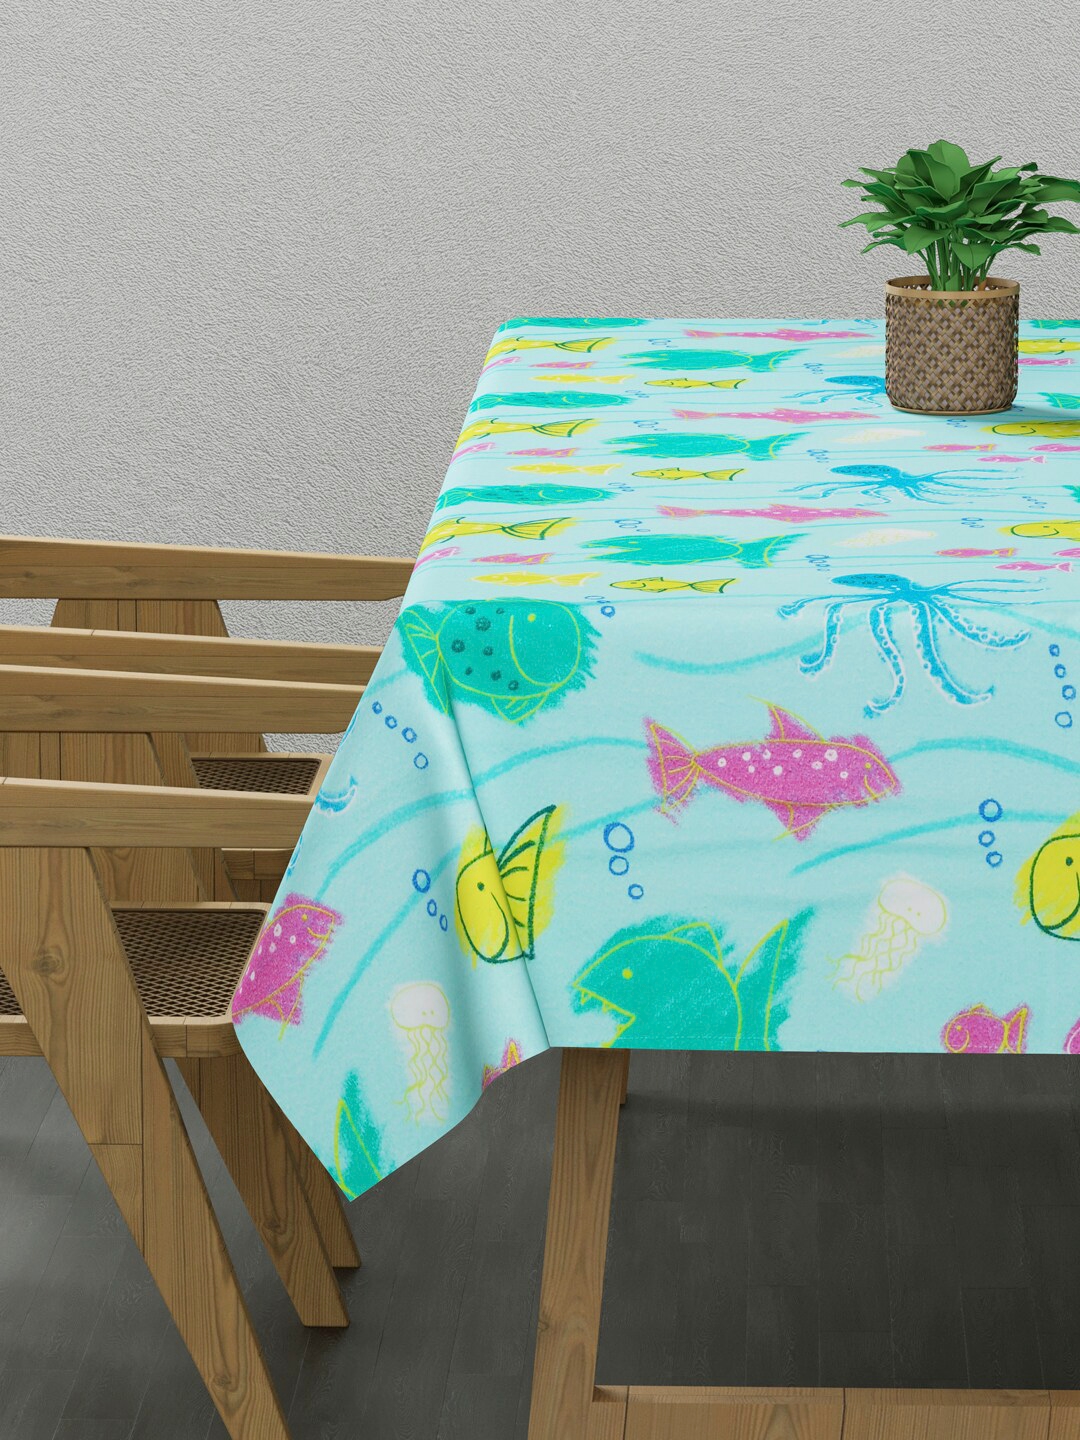 Clasiko Blue   Yellow Printed 4 Seater Rectangular Table Cover